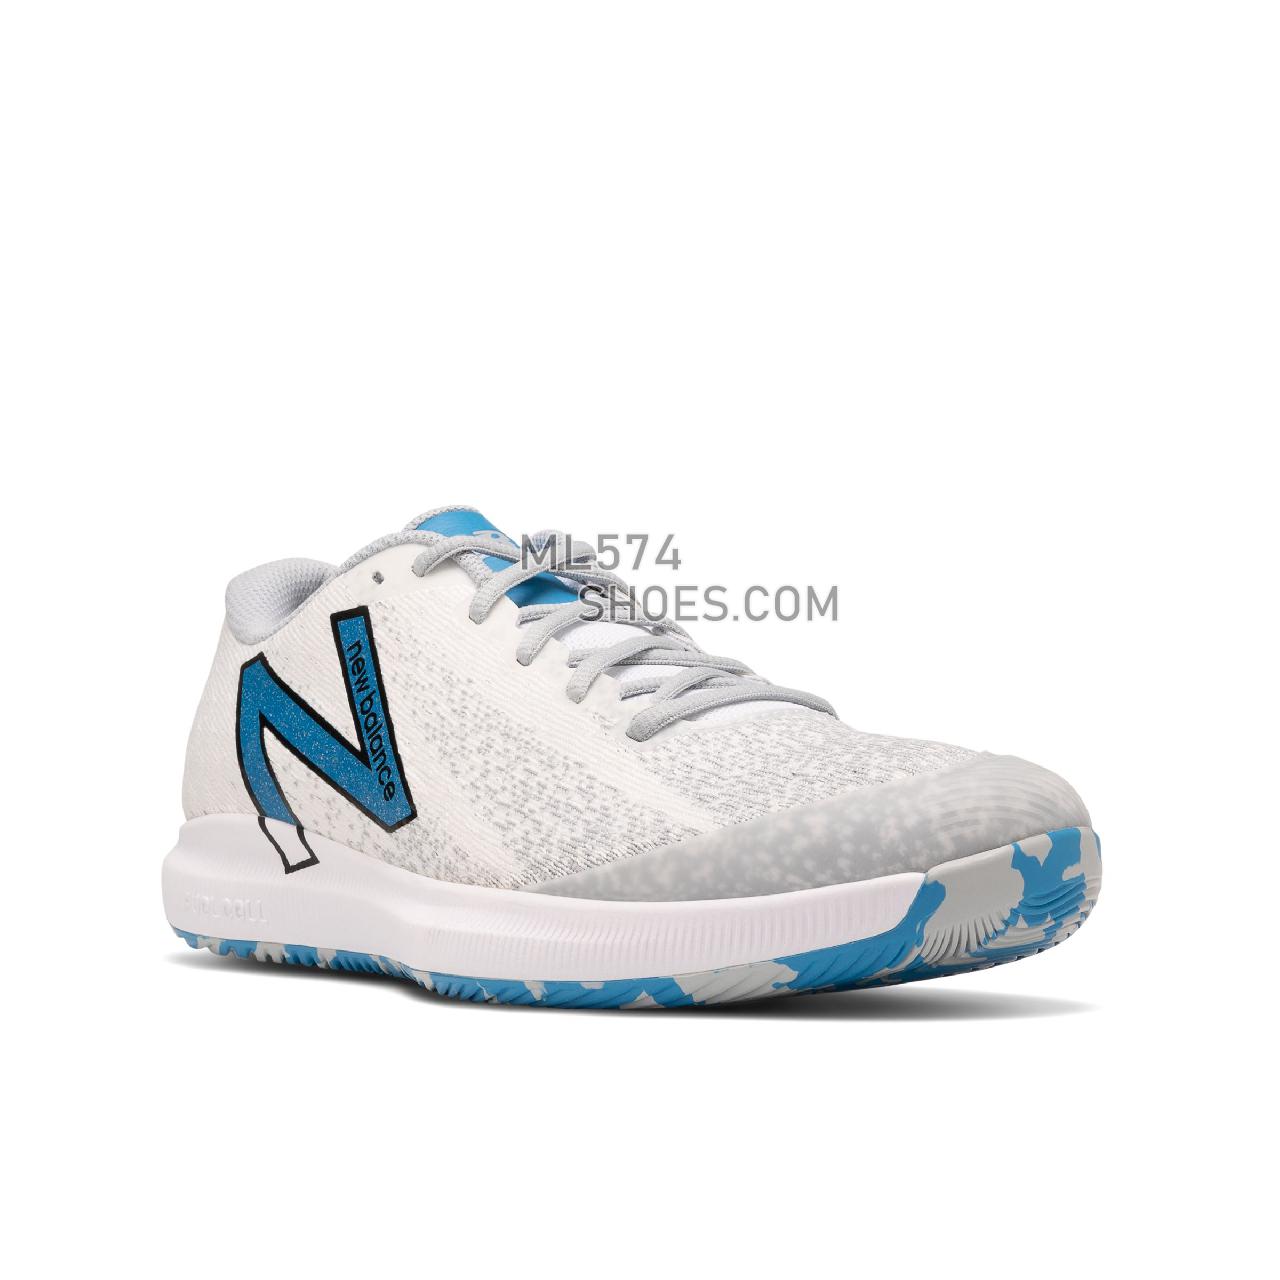 New Balance FuelCell 996v4.5 - Men's Tennis - White with Helium and Sulphur Yellow - MCH996N4